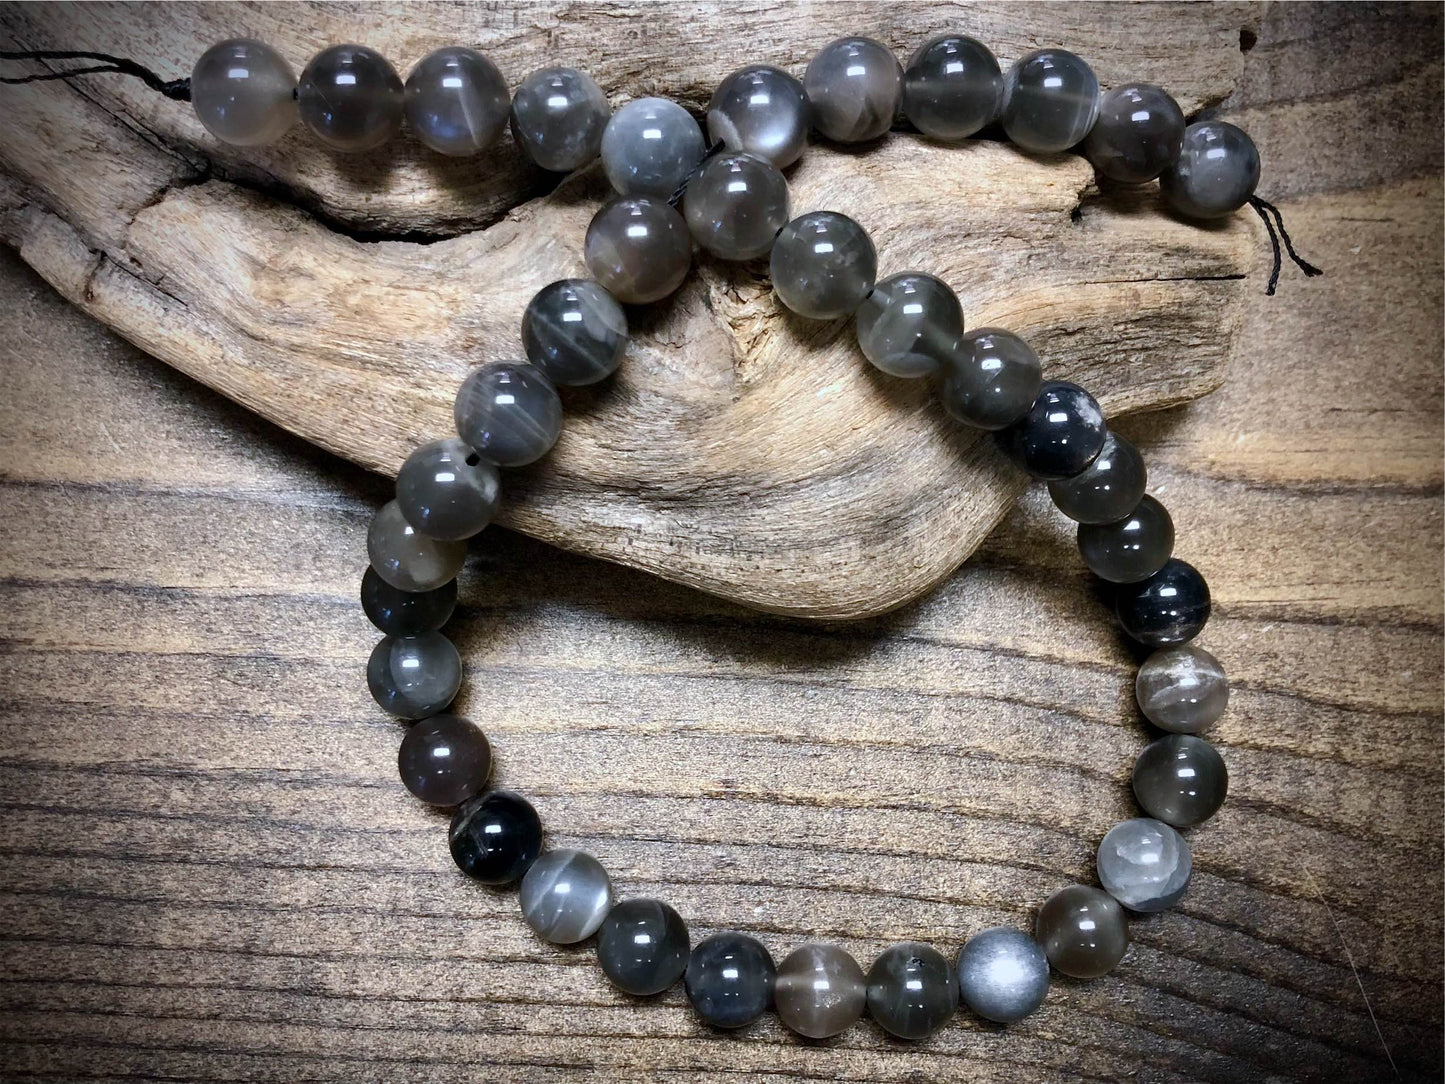 AAA Black Labradorite Smooth Rounds Bead Strand - 10mm - 15"